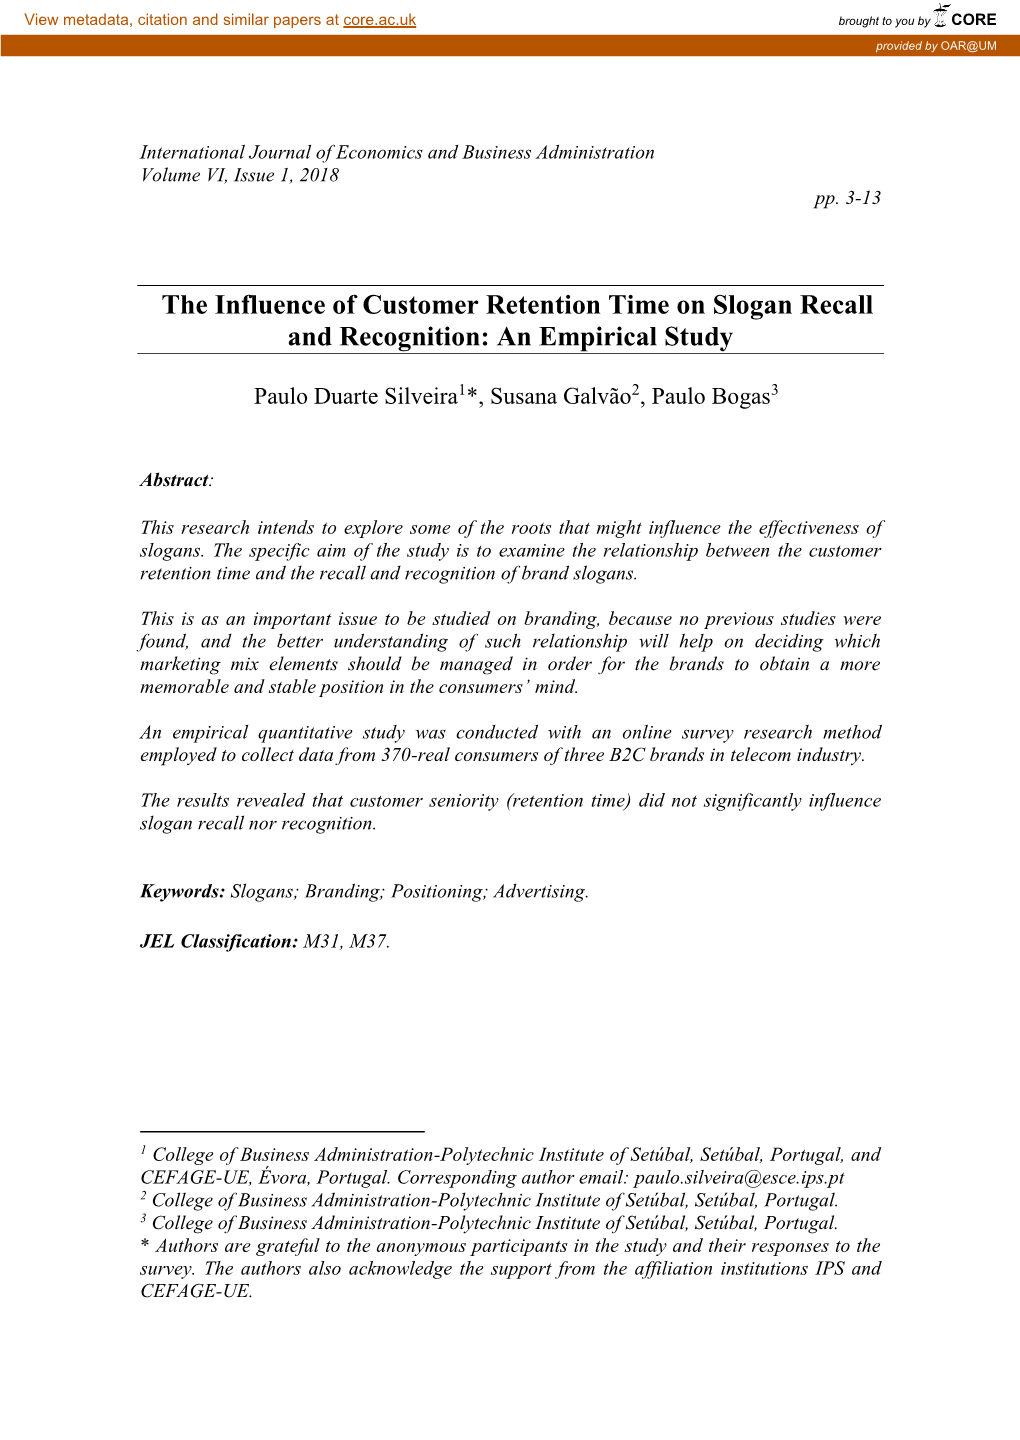 The Influence of Customer Retention Time on Slogan Recall and Recognition: an Empirical Study